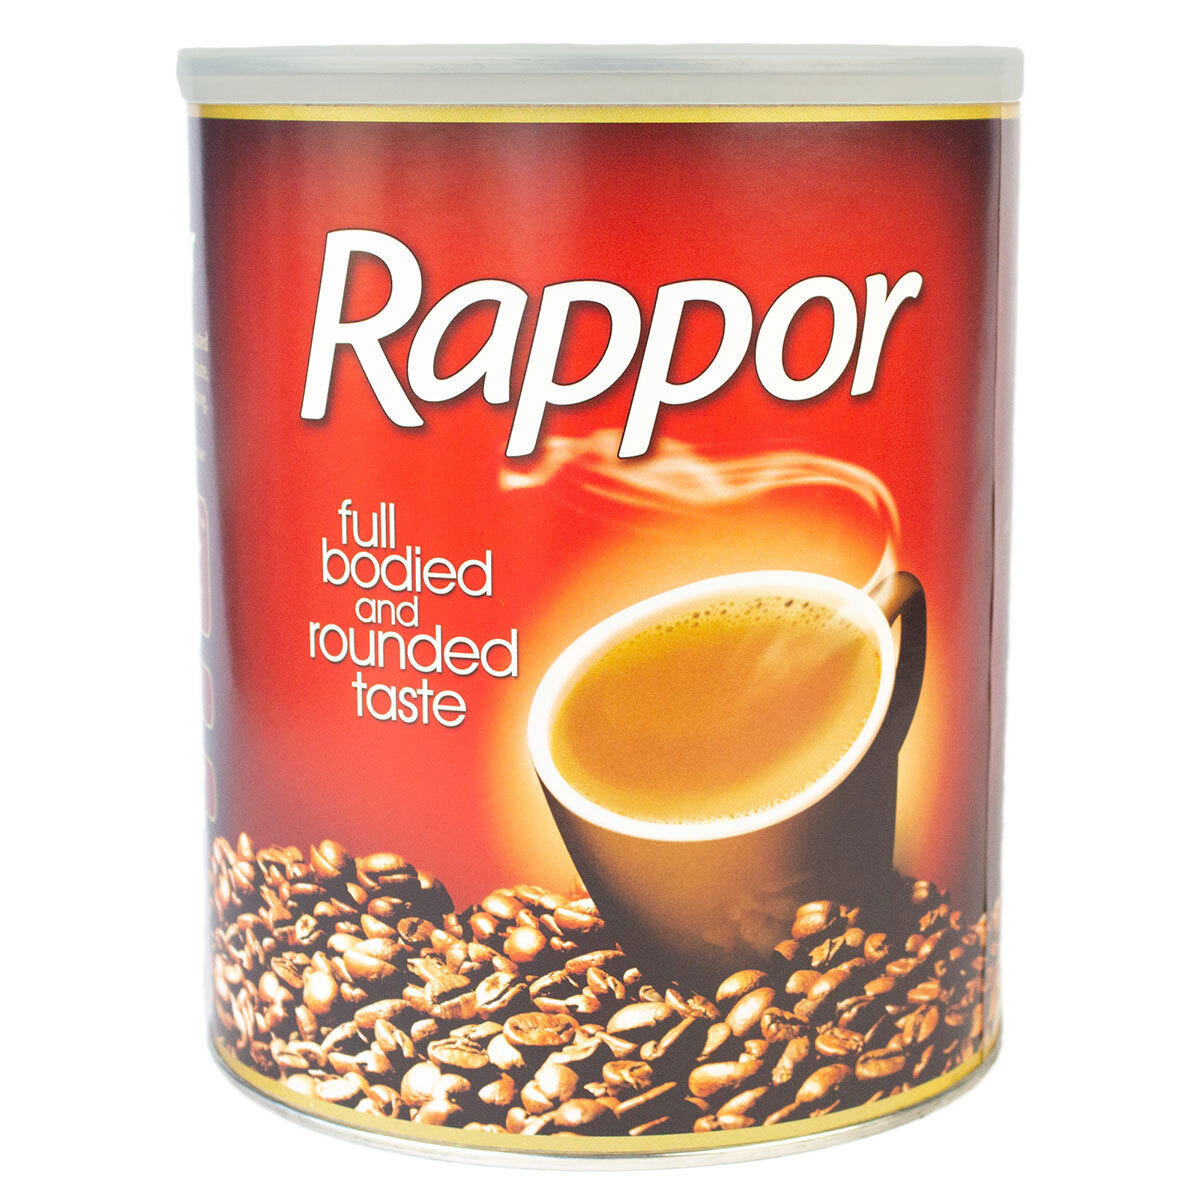 Cut out image of rappor coffee on white background